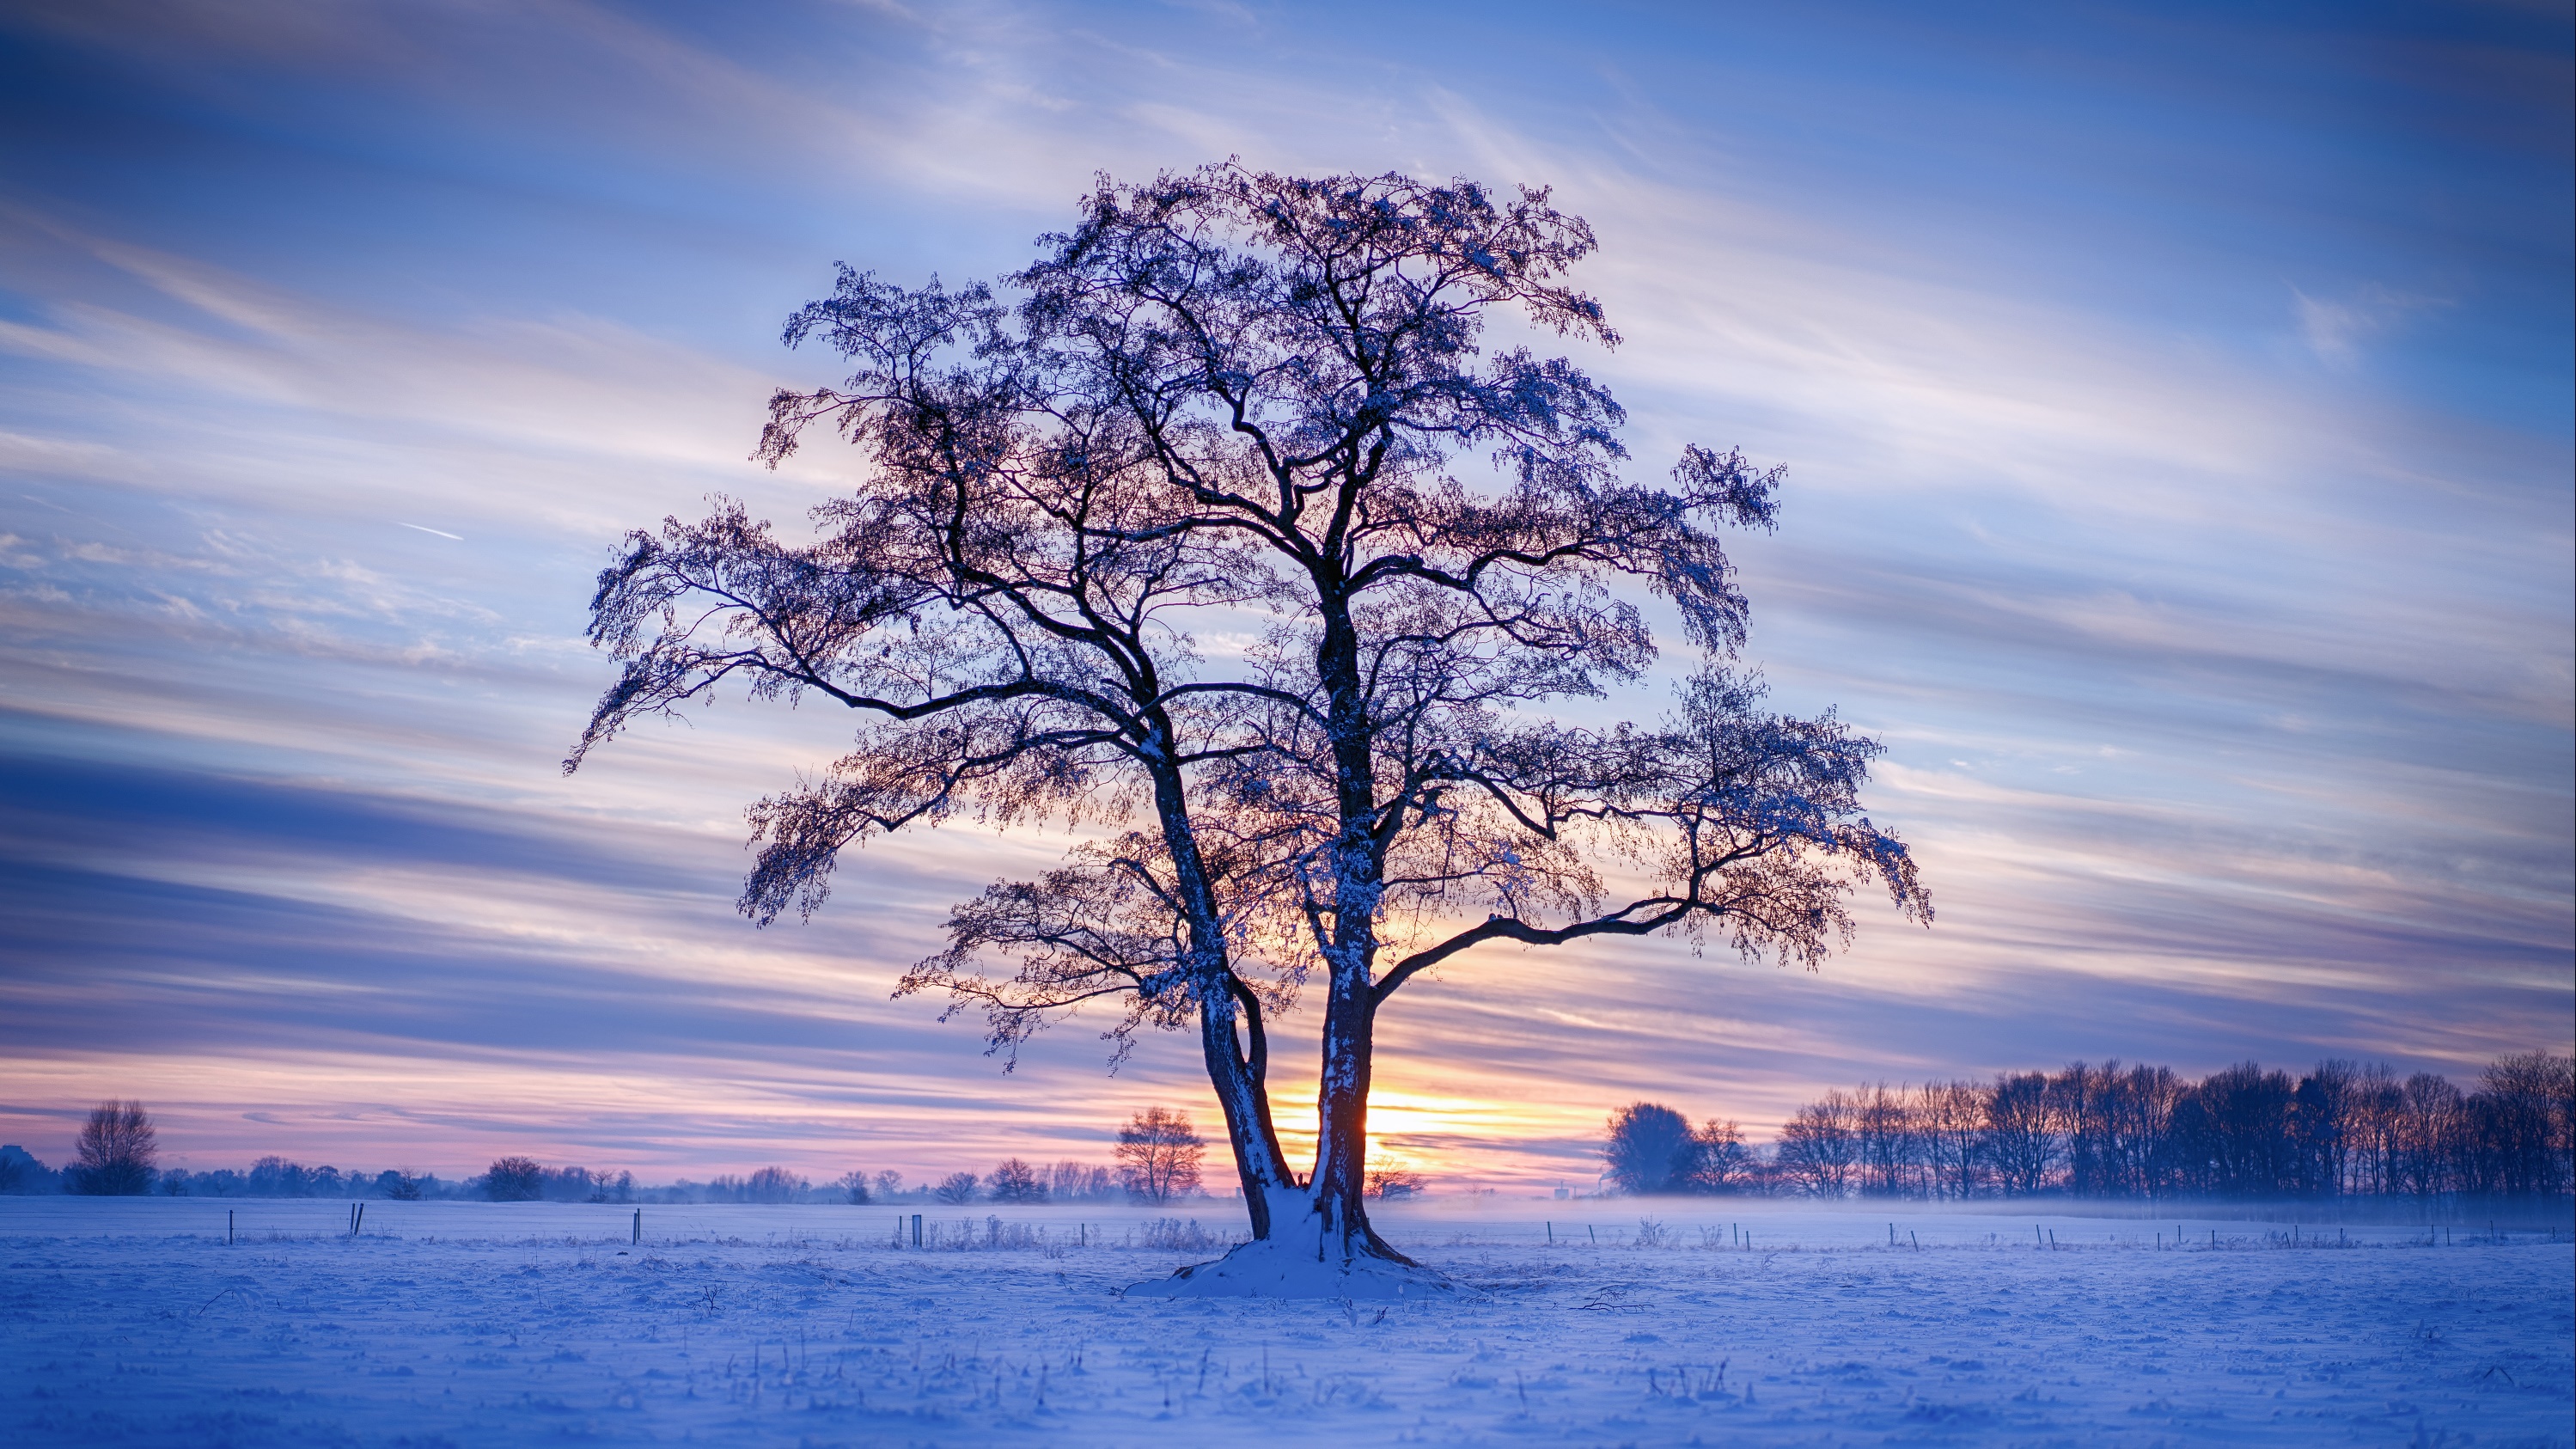 General 2998x1686 outdoors landscape field trees cold ice snow winter sunlight frost nature